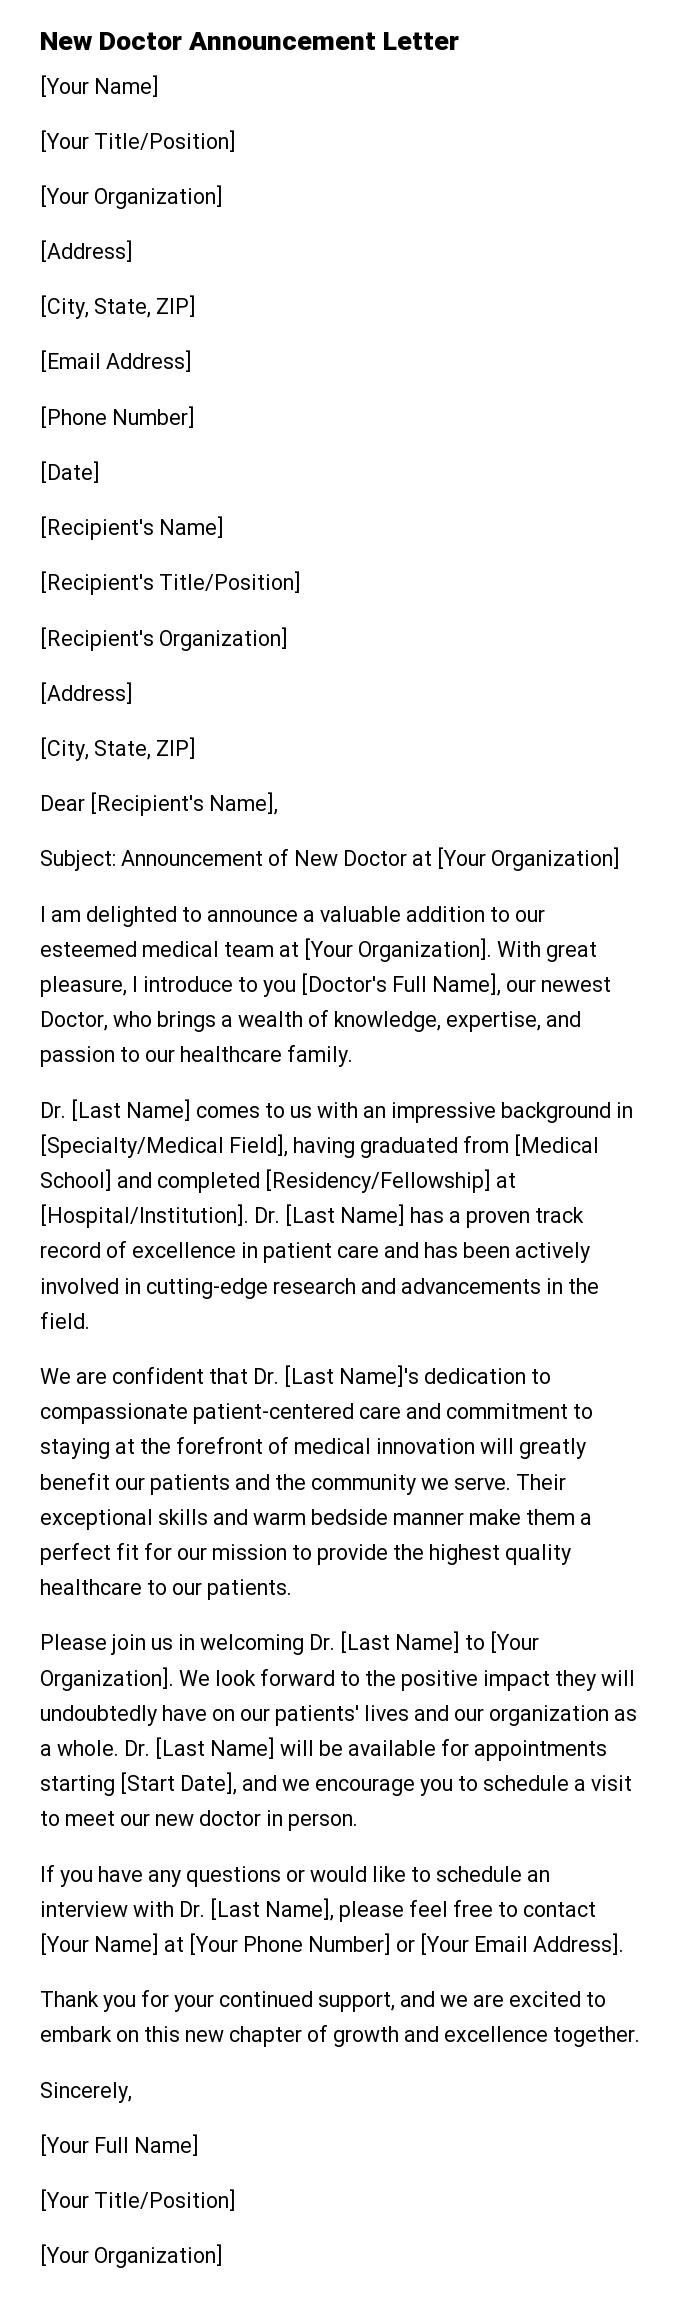 New Doctor Announcement Letter